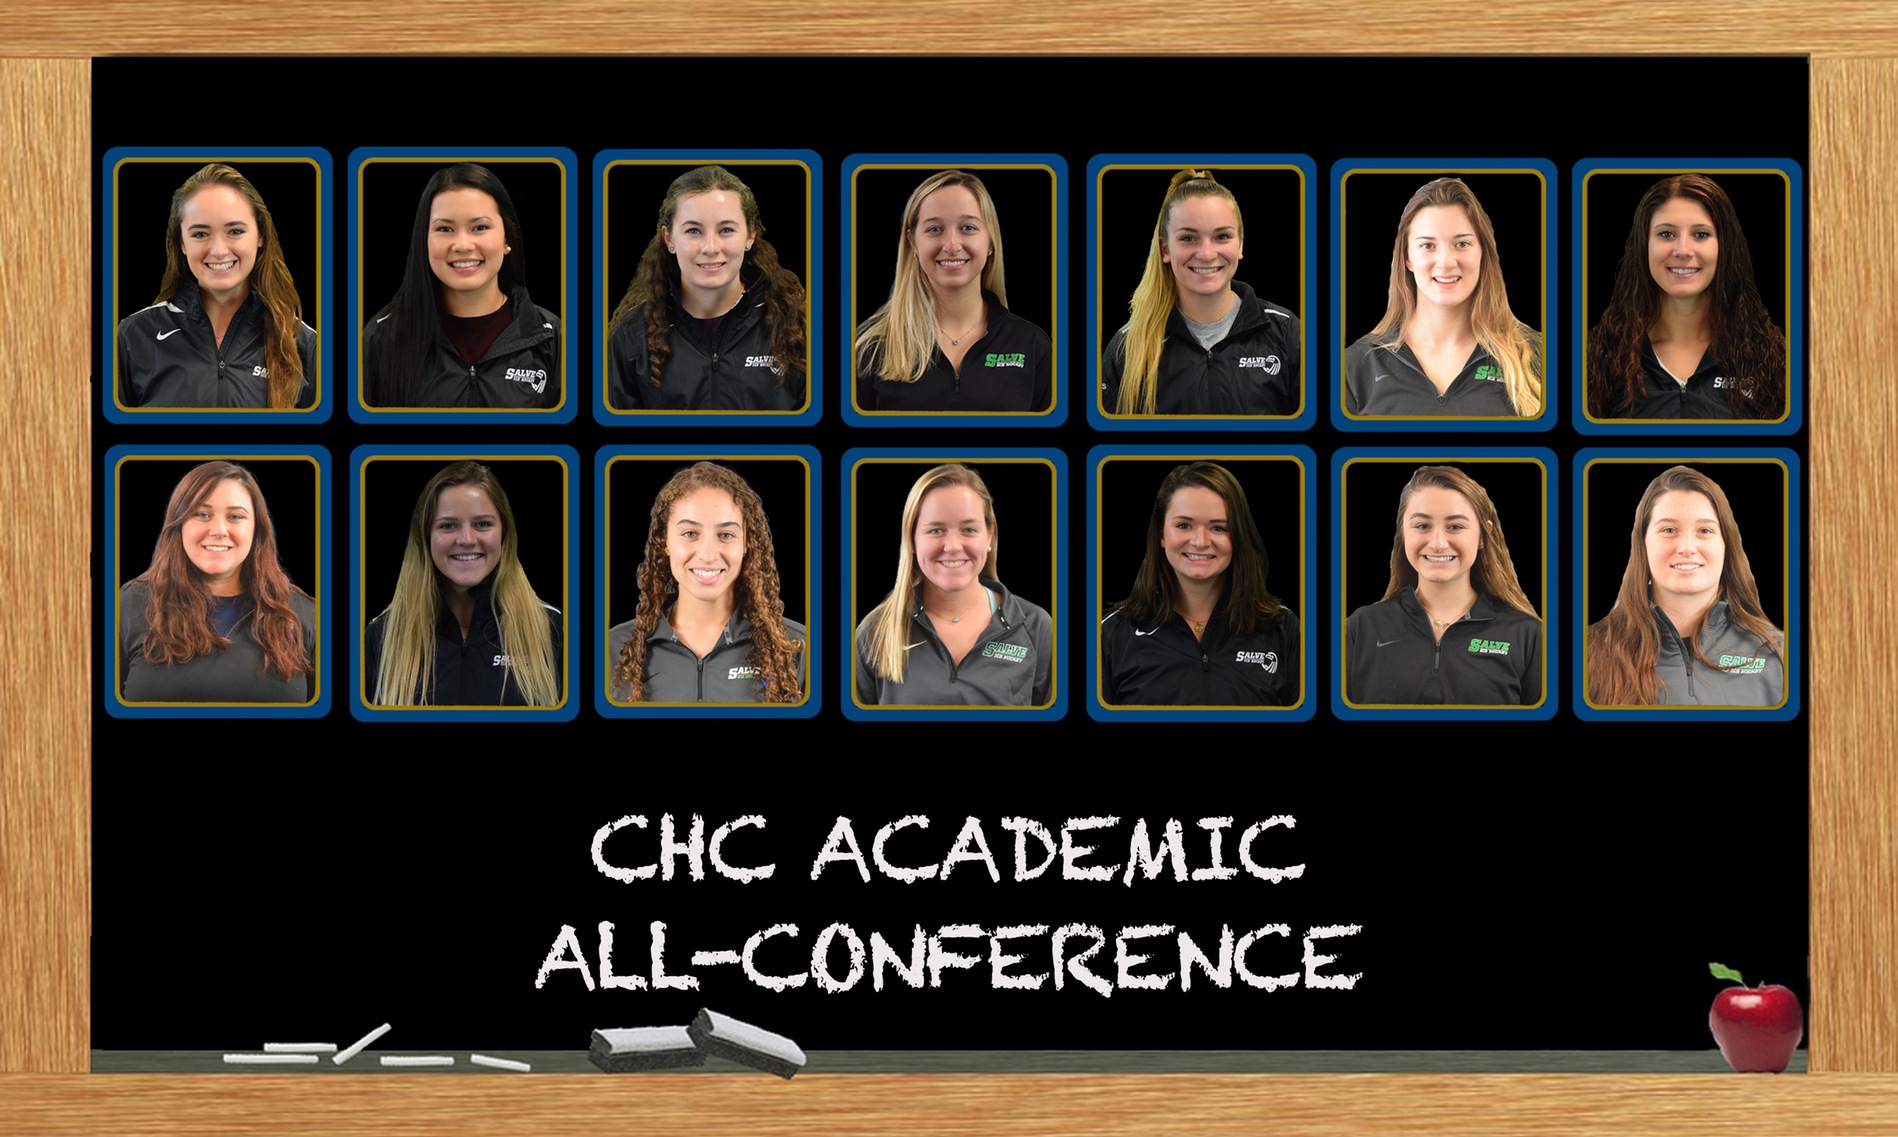 14 Seahawks made the CHC Academic All-Conference team.